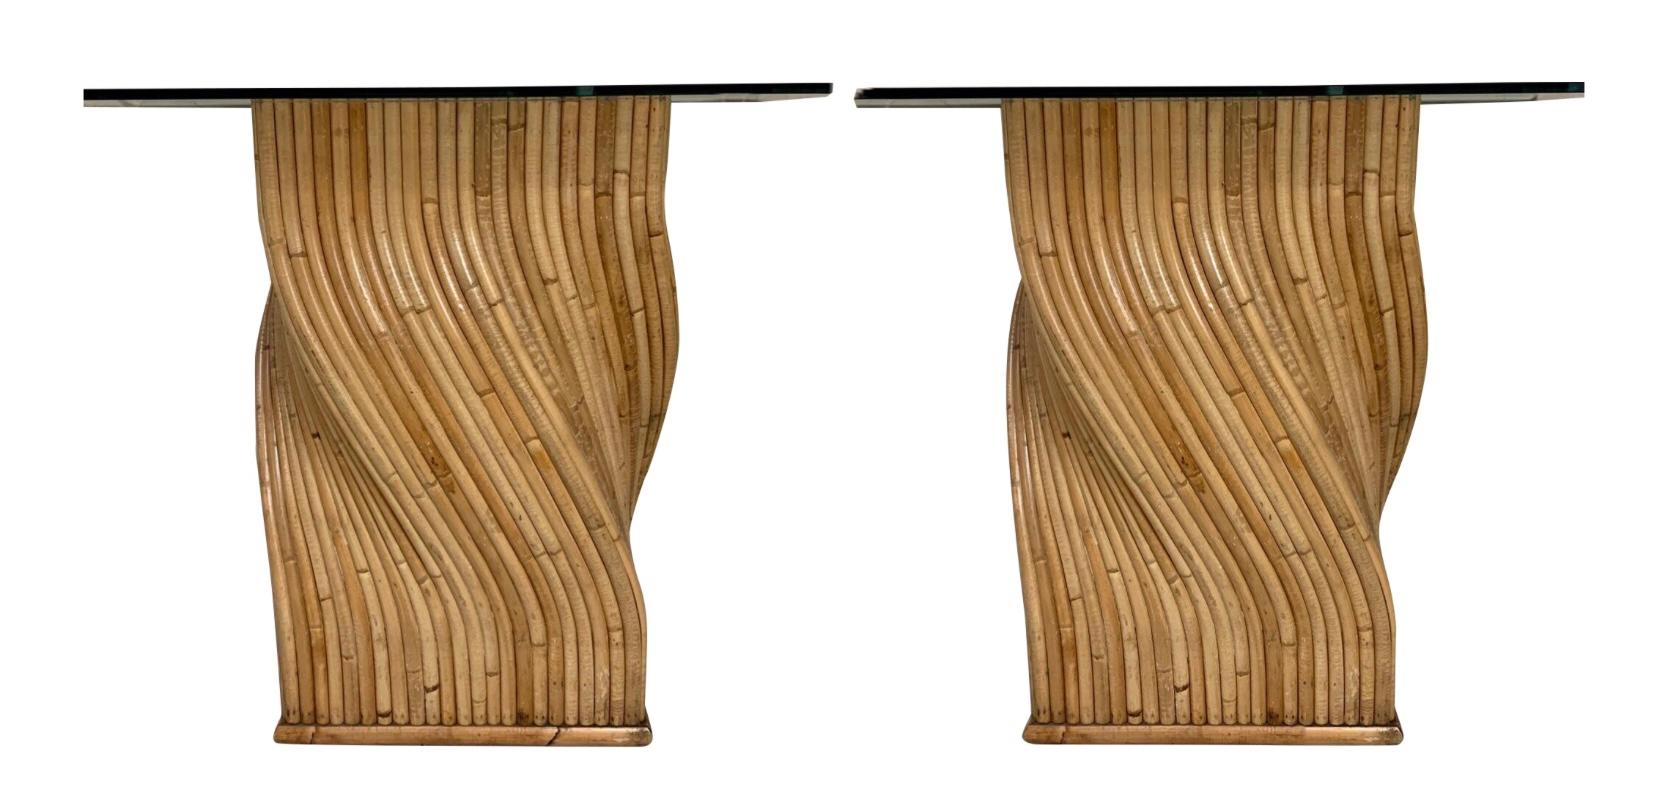 20th Century Organic Modern Pencil Bamboo Table Bases / Pedestals / Console Tables - Pair For Sale